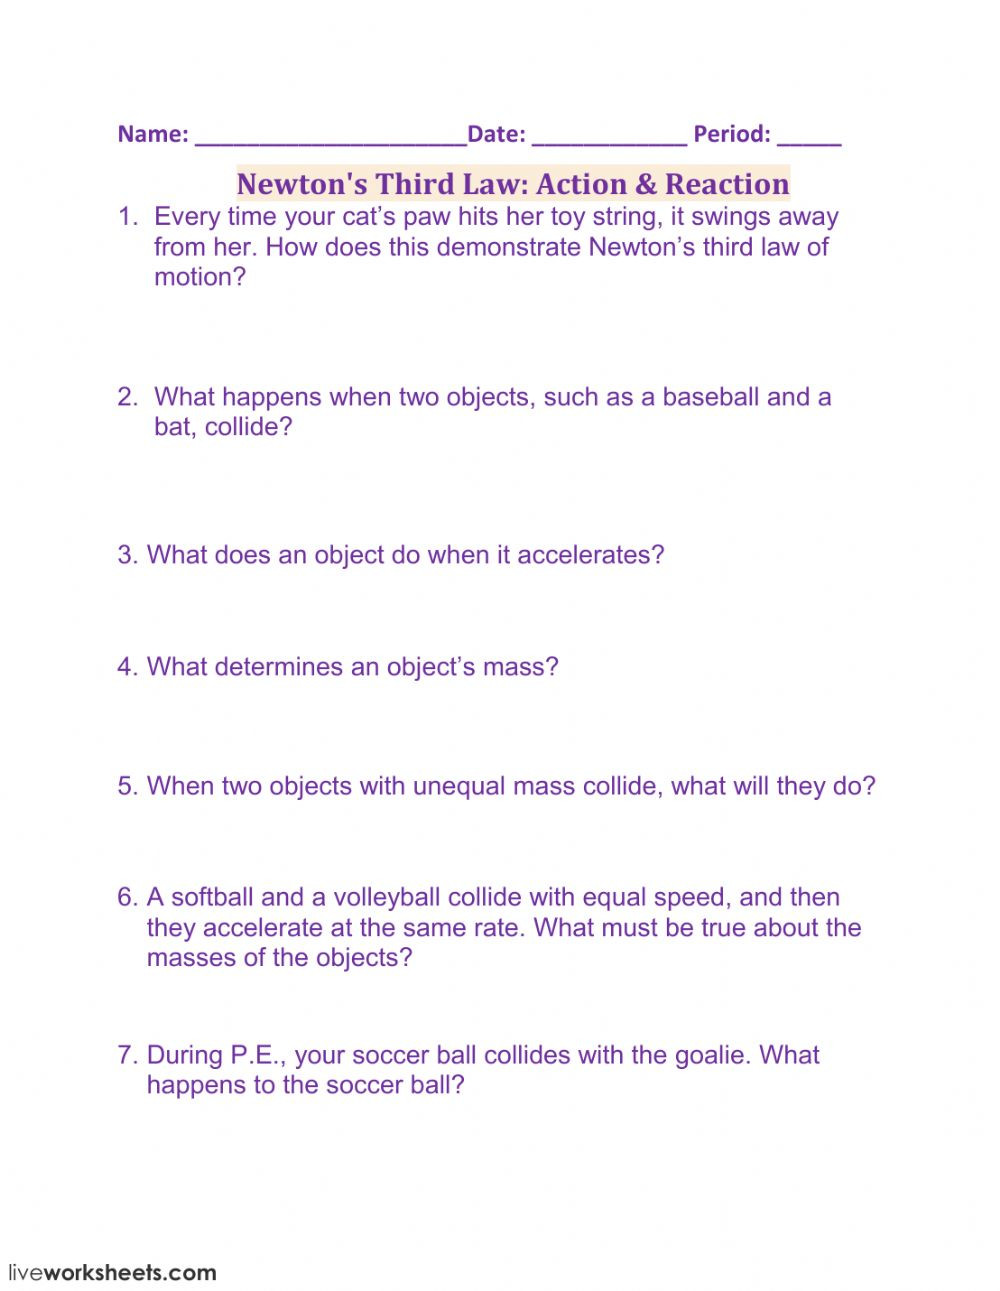 Newton039s Second Law Worksheet Answers Inertia and Mass Worksheet Answers Nidecmege